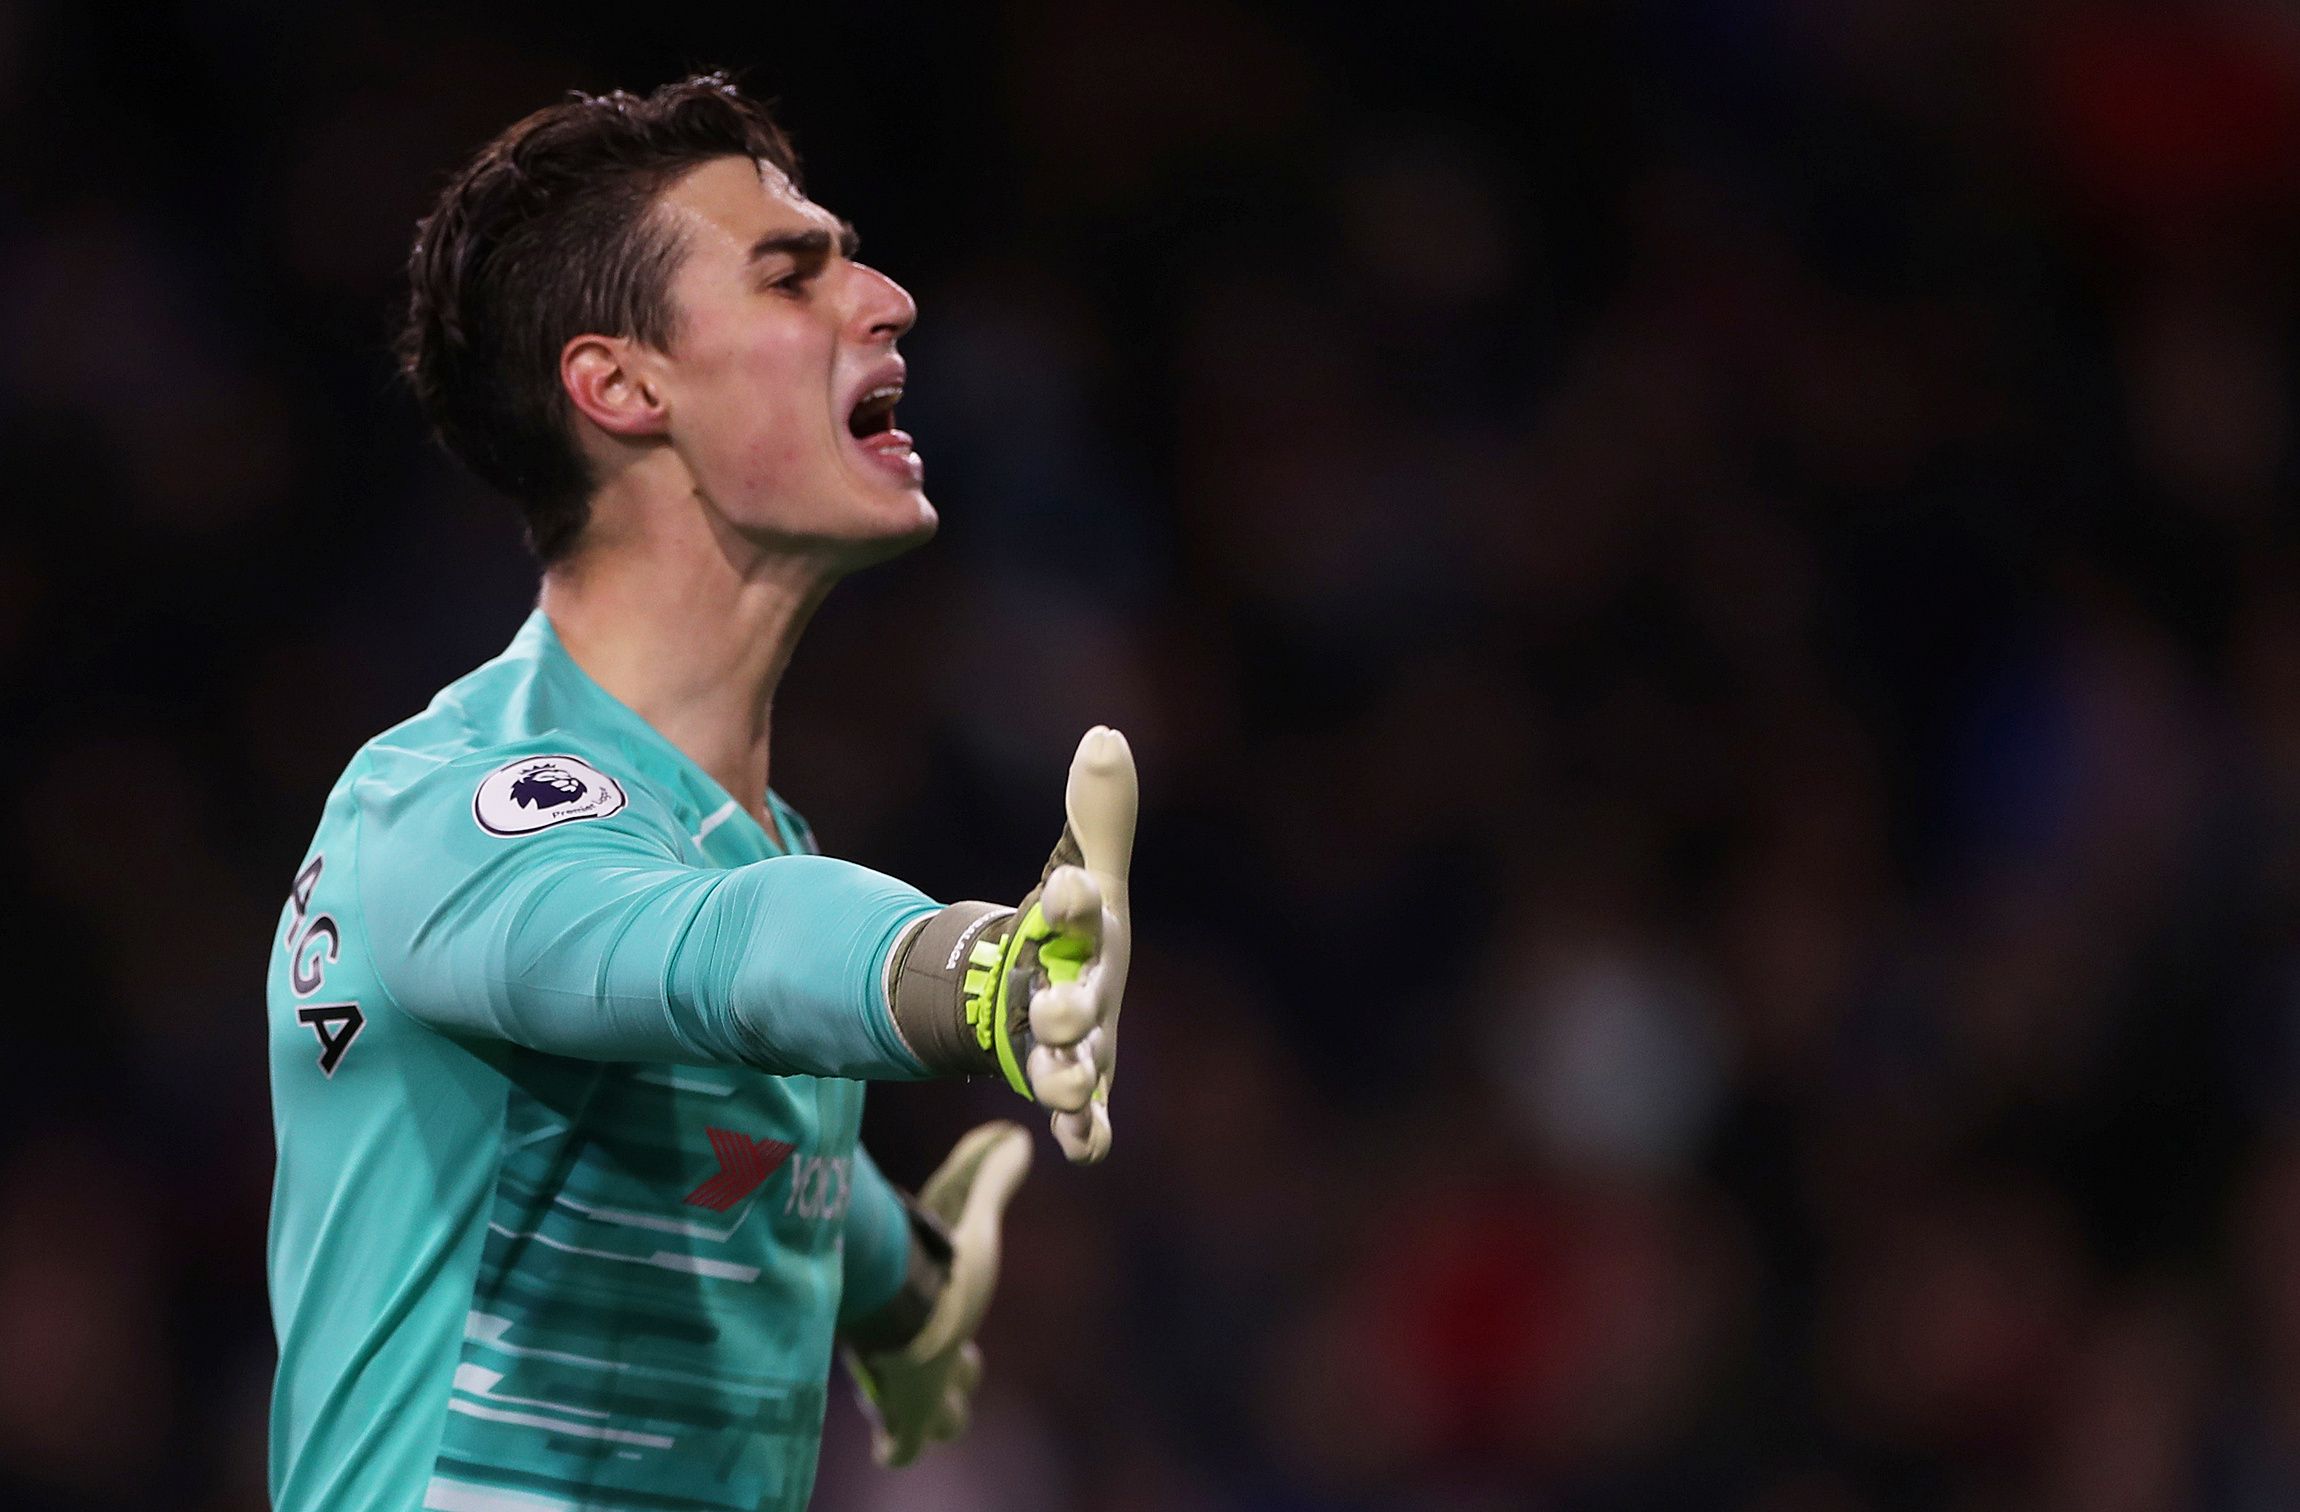 Soccer Football - Premier League - Burnley v Chelsea - Turf Moor, Burnley, Britain - October 26, 2019  Chelsea's Kepa Arrizabalaga gestures    Action Images via Reuters/Lee Smith  EDITORIAL USE ONLY. No use with unauthorized audio, video, data, fixture lists, club/league logos or 